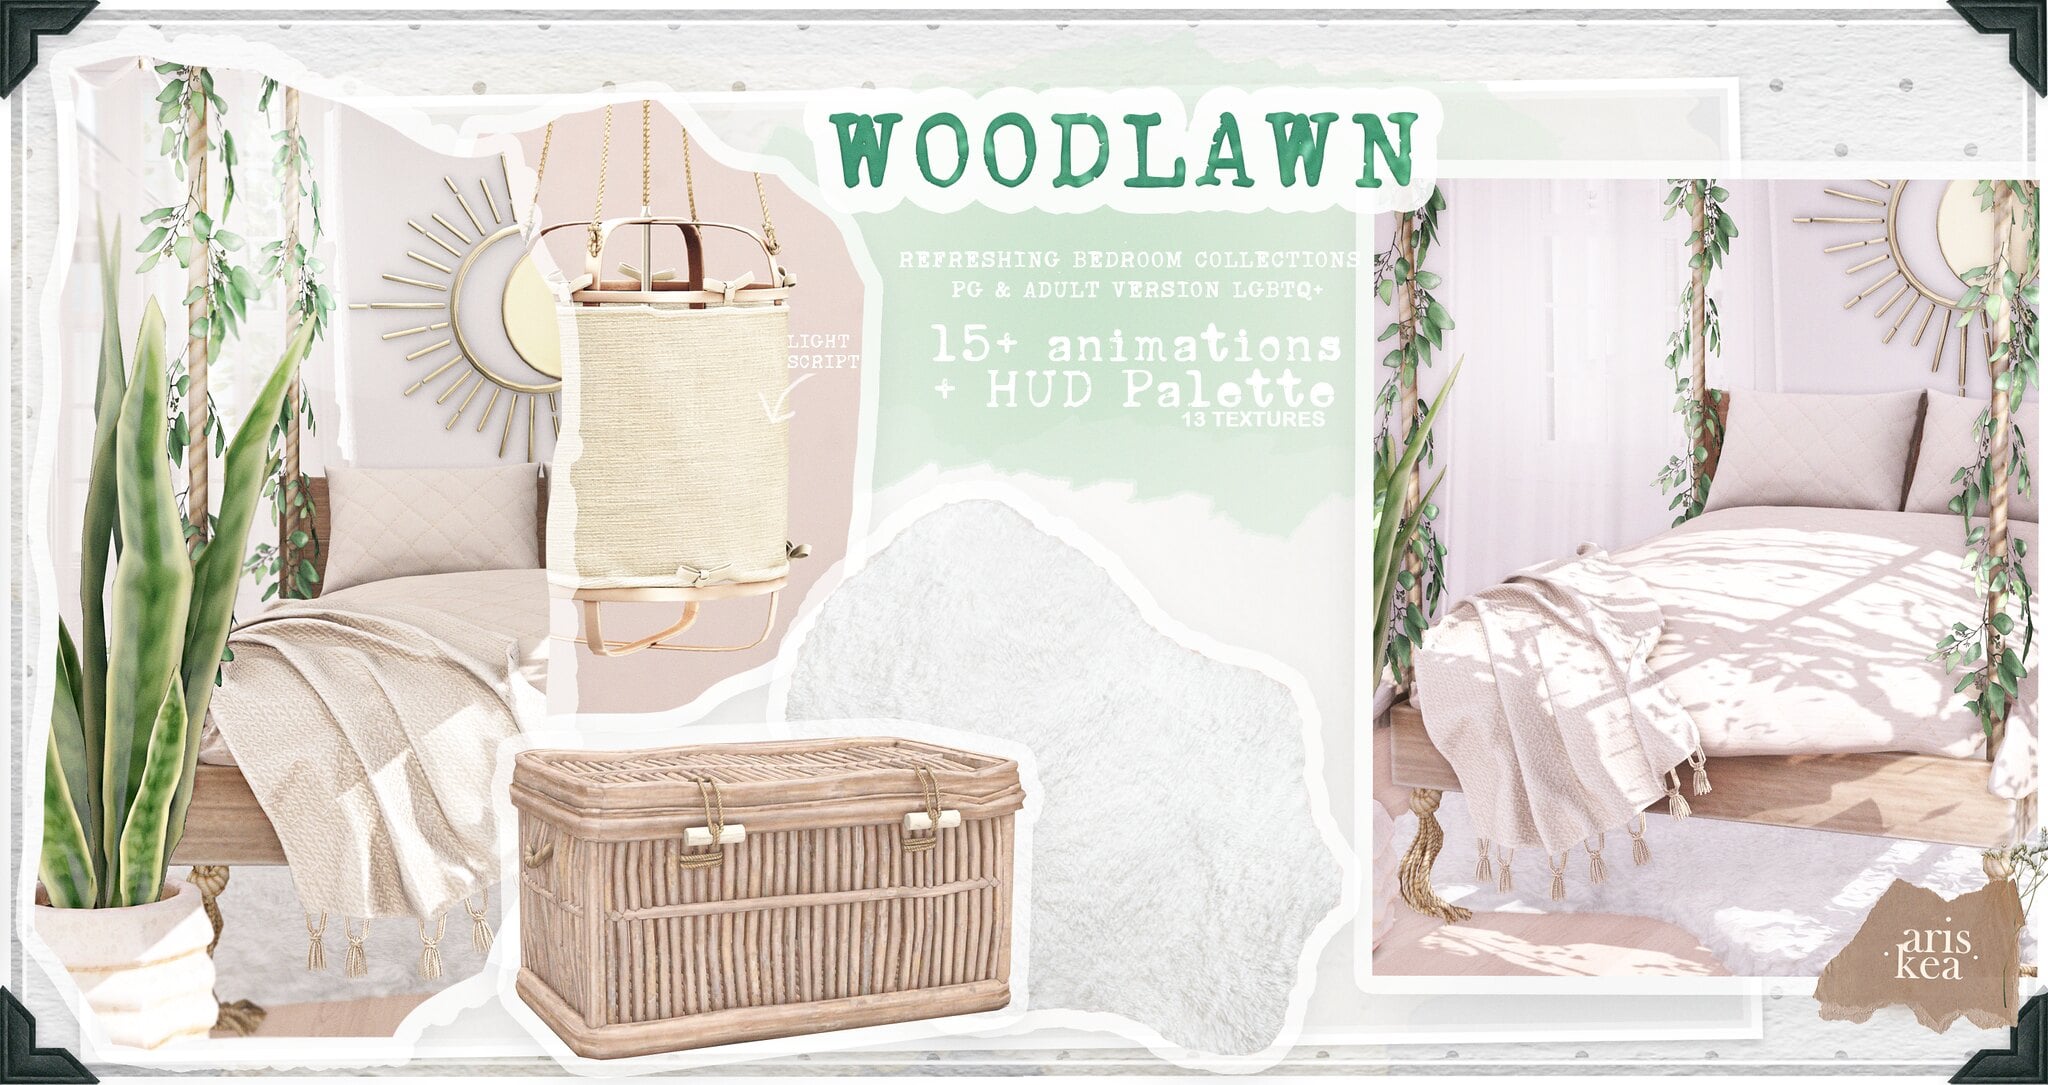 Ariskea – Woodlawn Bed. Collection